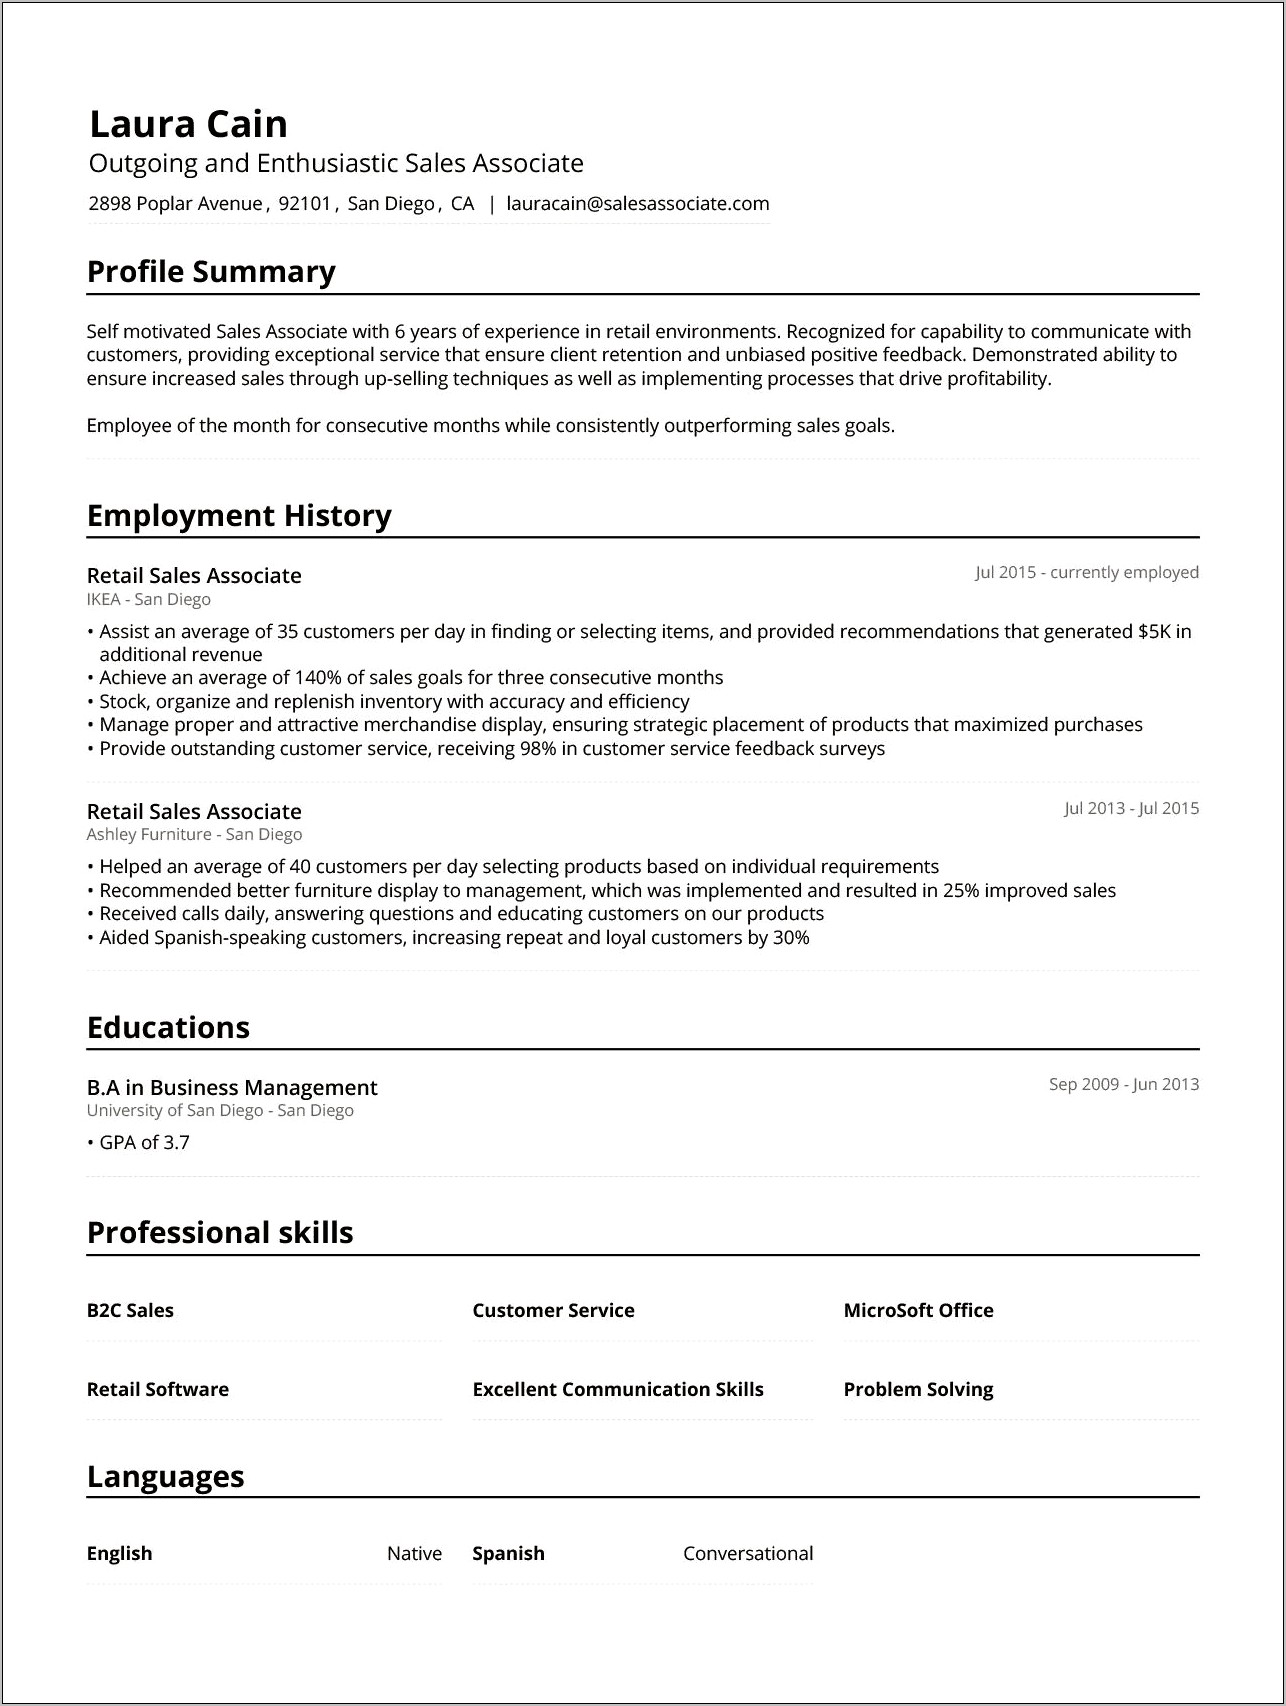 Resume For Sales Position Objective